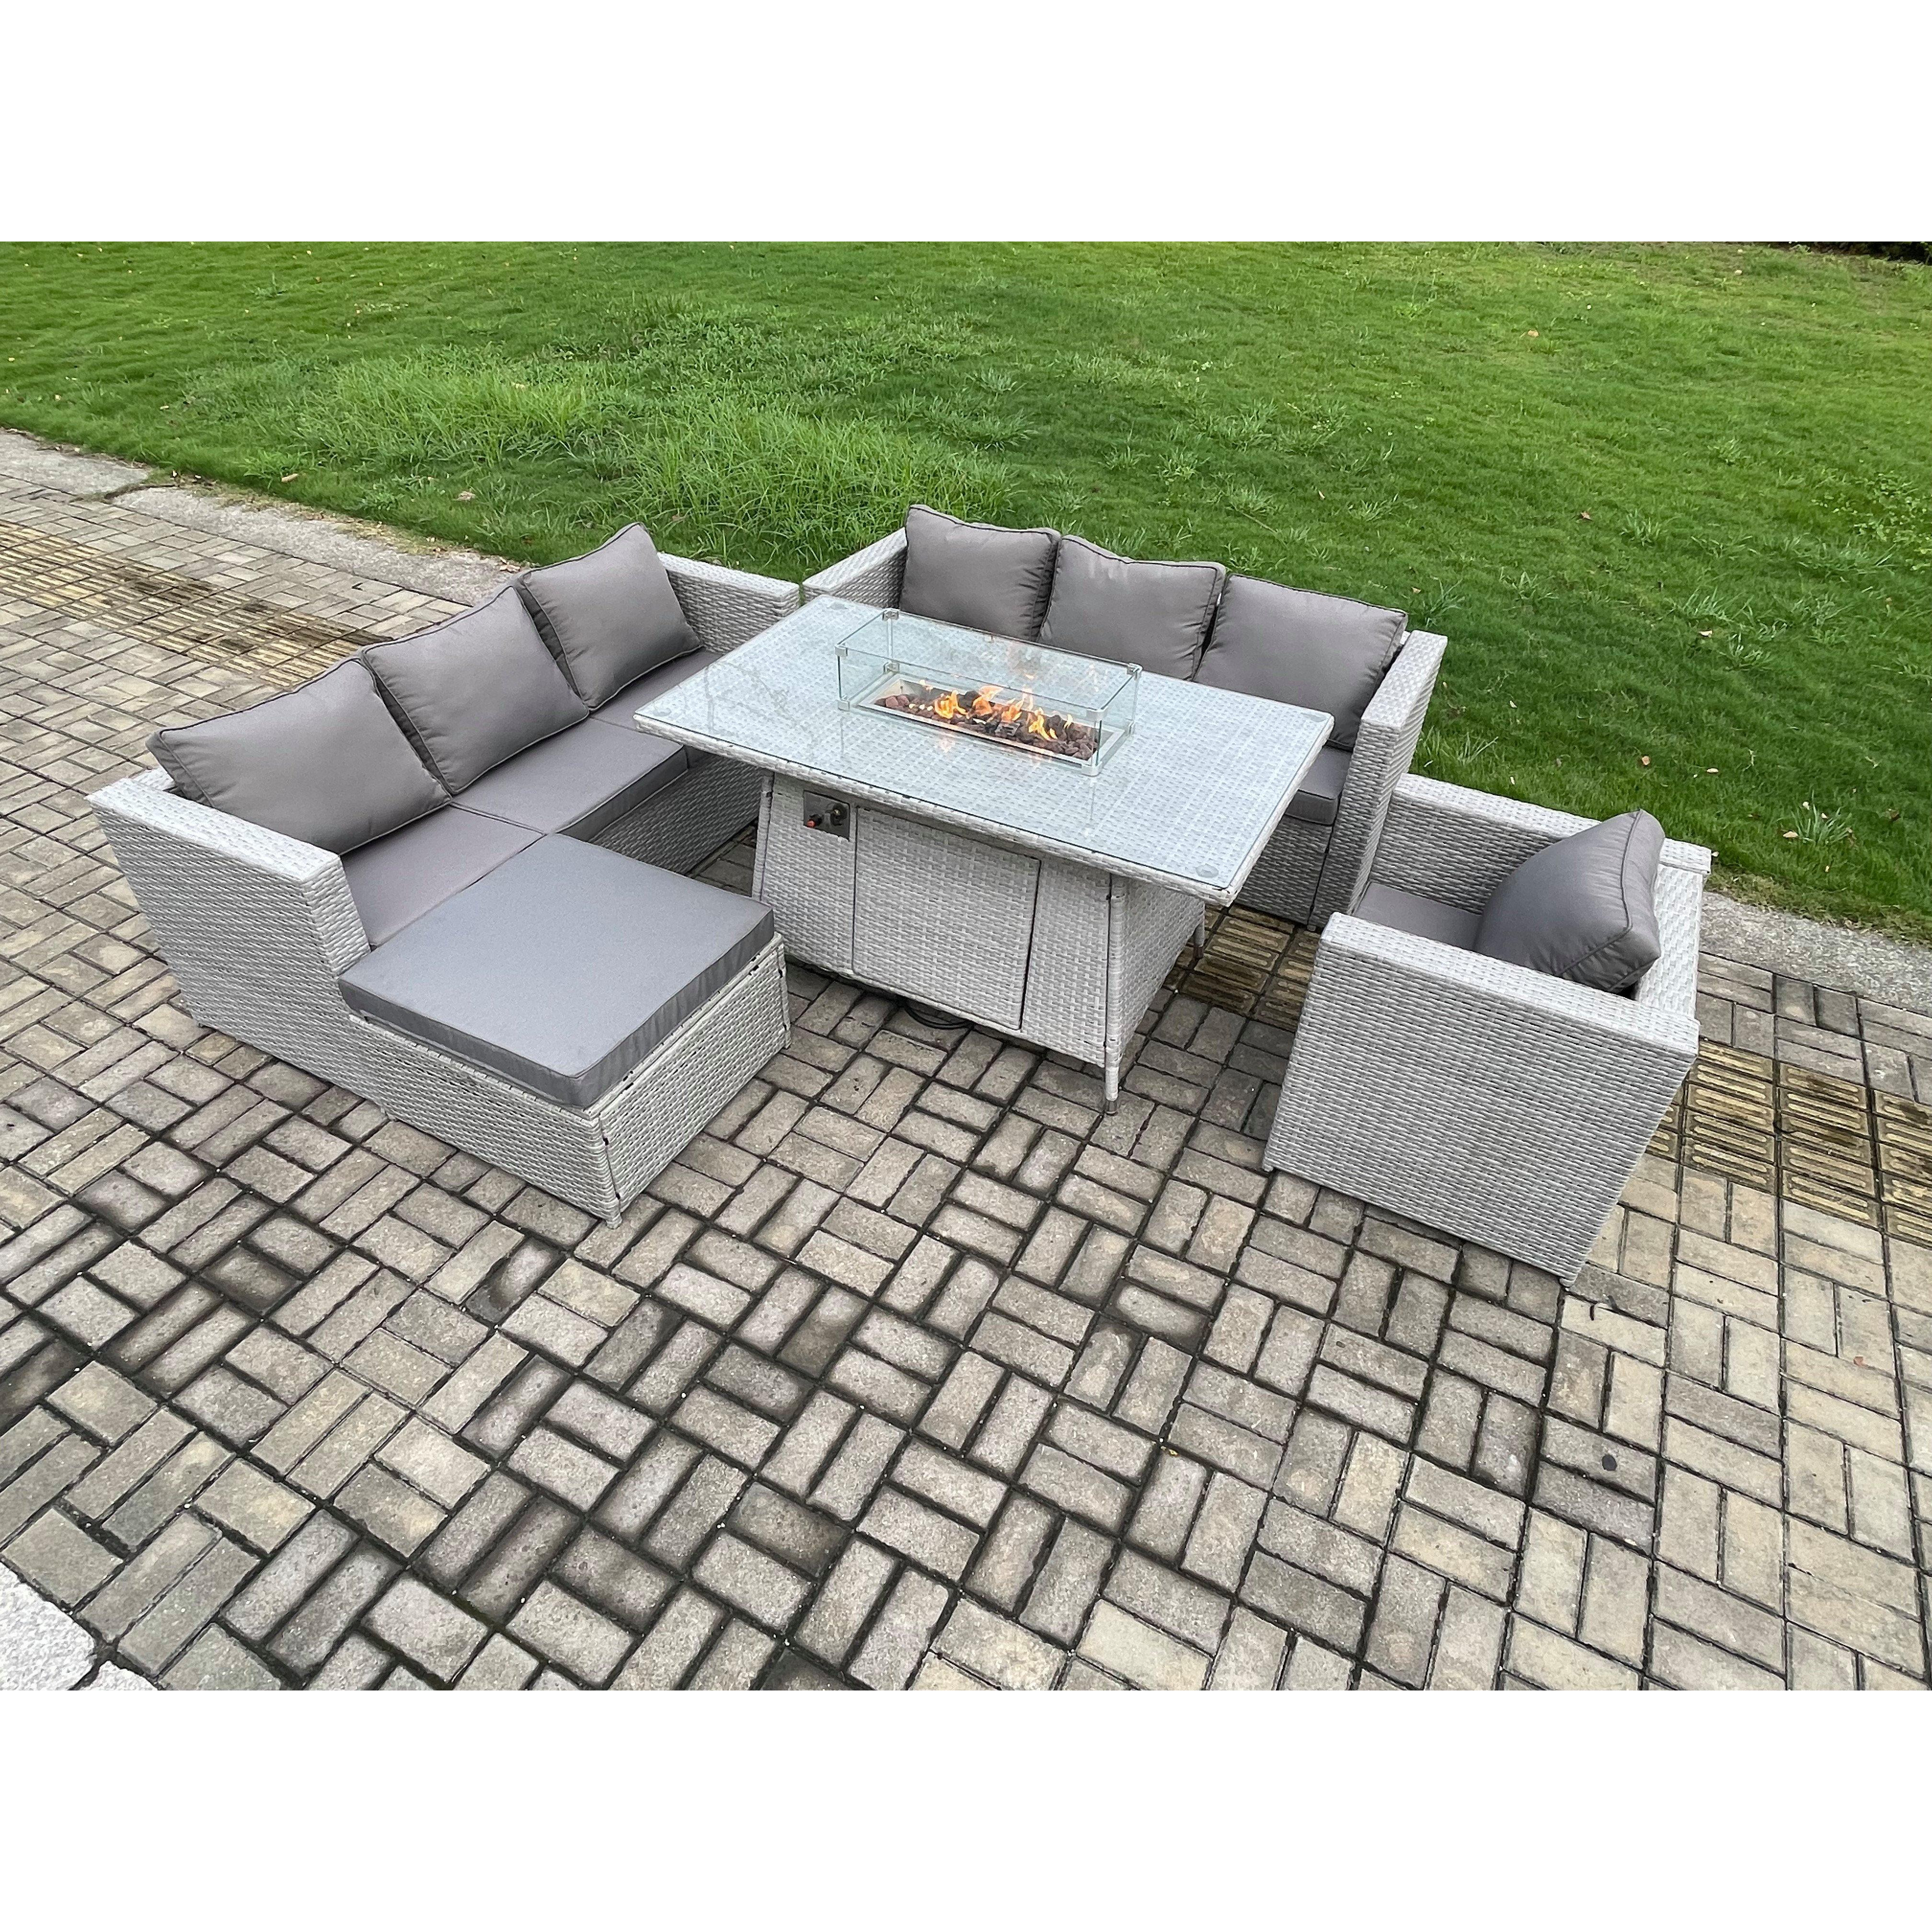 8 Seater Outdoor Garden Dining Sets Rattan Furniture Gas Fire Pit Dining Table Gas Heater with Armchair - image 1